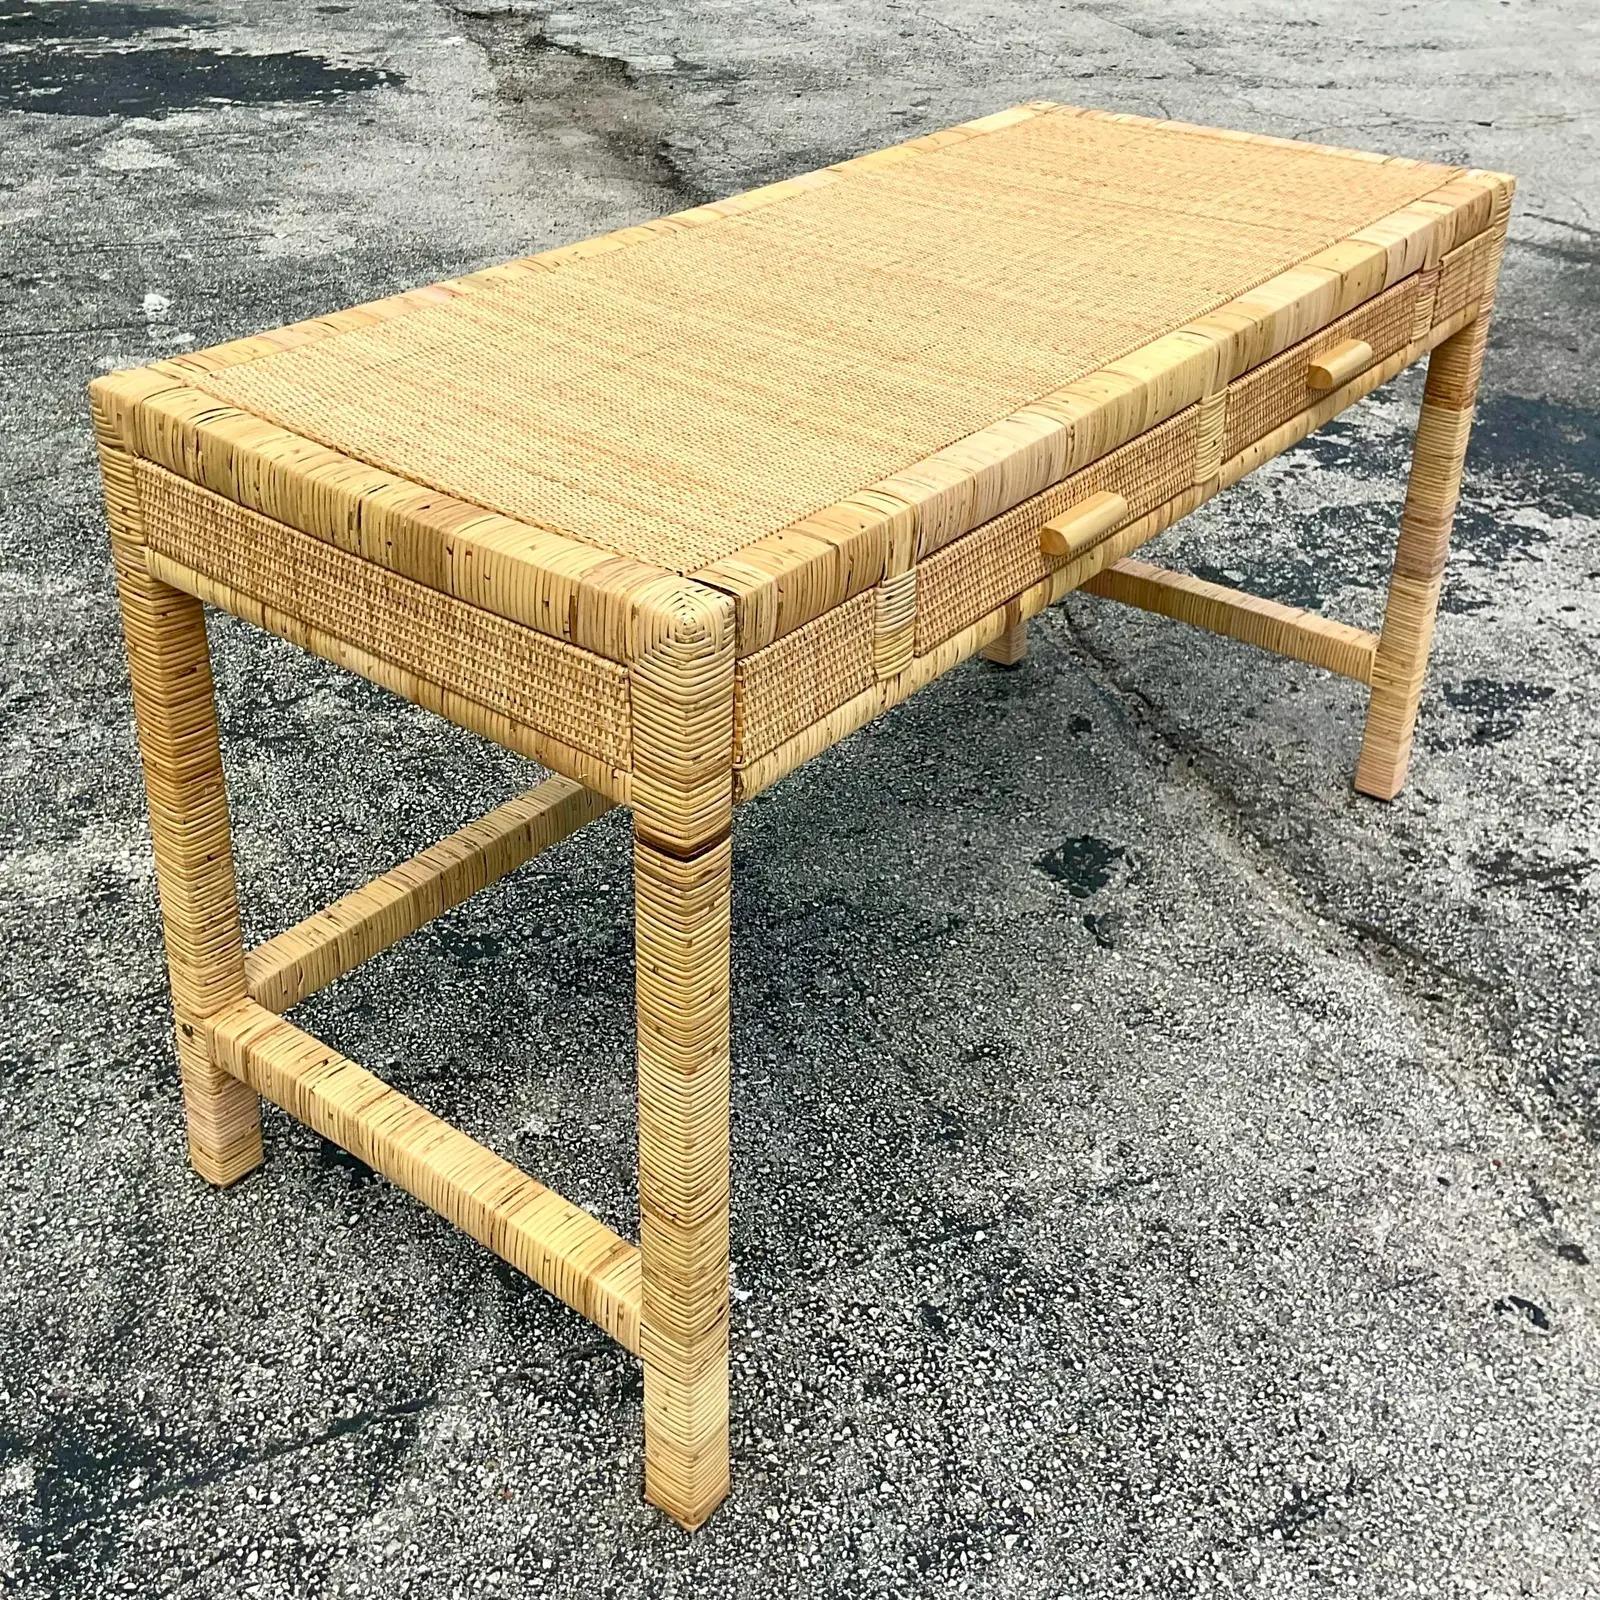 A fabulous Contemporary Coastal writing desk. Beautiful wrapped rattan frame with inset woven rattan panels. Acquired from a Palm Beach estate.